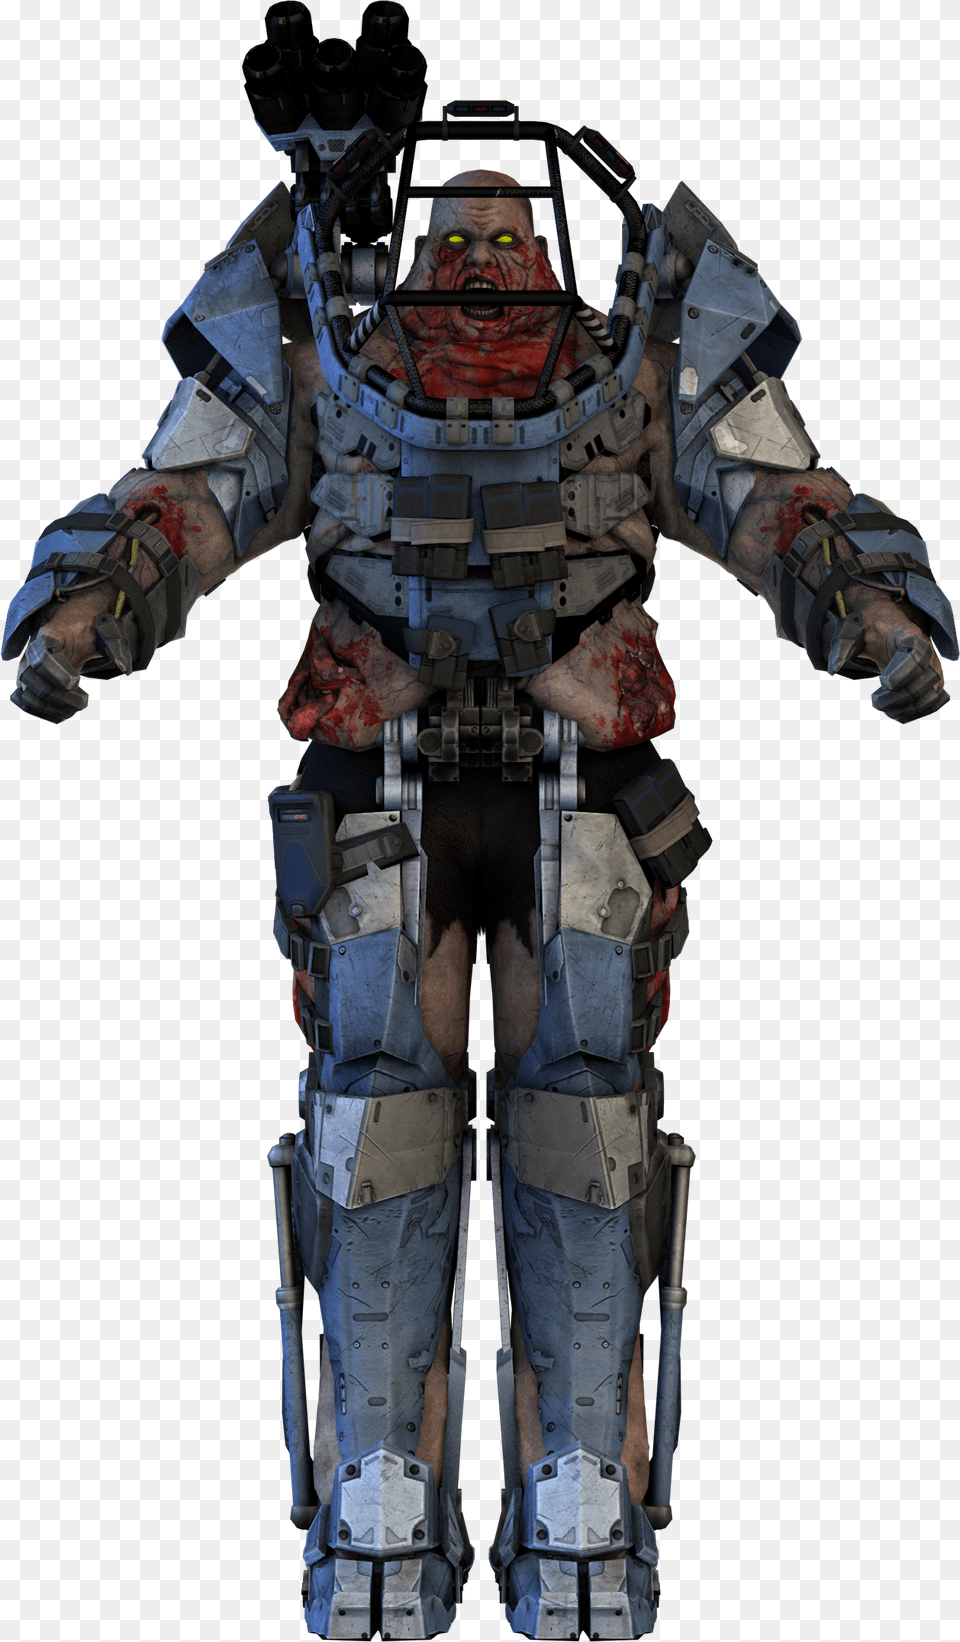 Goliath Zombie Render Aw Cod Aw Zombie Goliath, Adult, Male, Man, Person Png Image